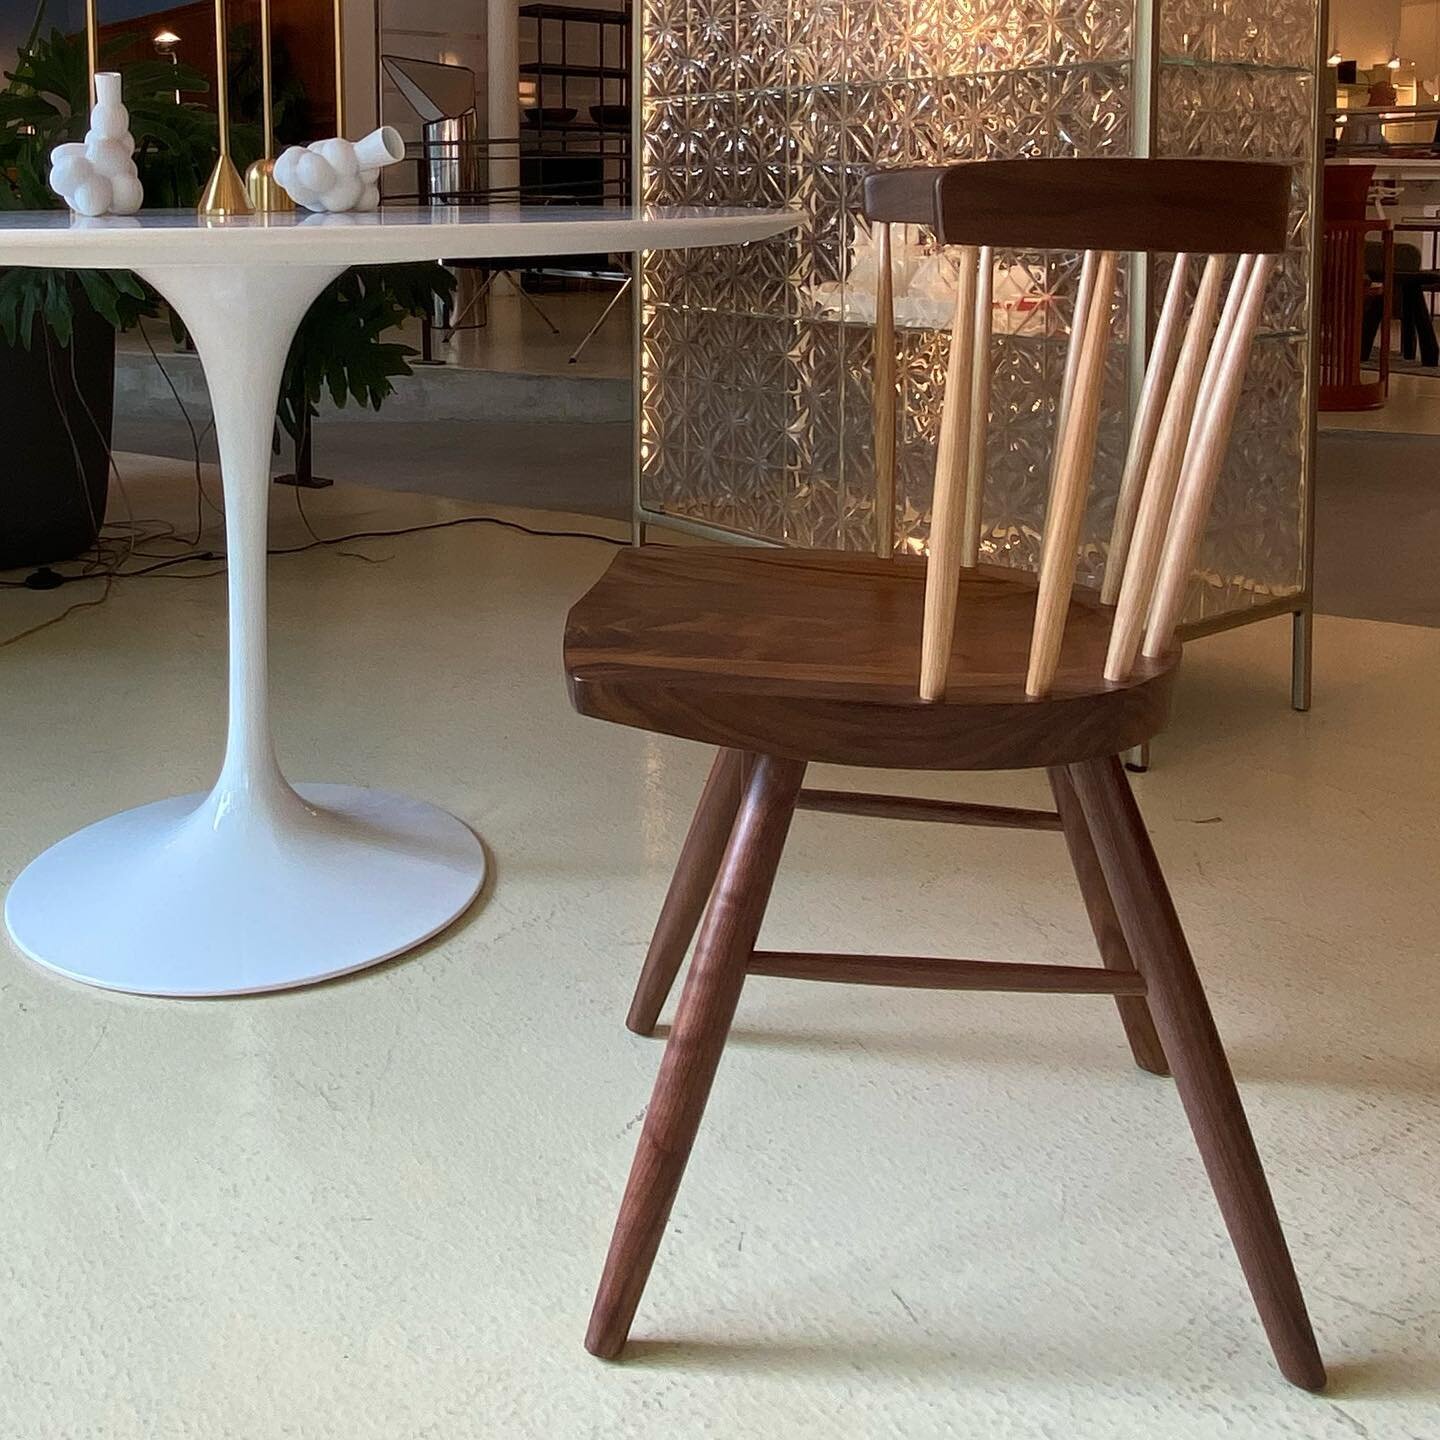 The STRAIGHT Chair, designed by George Nakashima for Knoll in the 1940&rsquo;s, still reflects his deep respect for the inherent beauty of natural wood. See it at Centro.